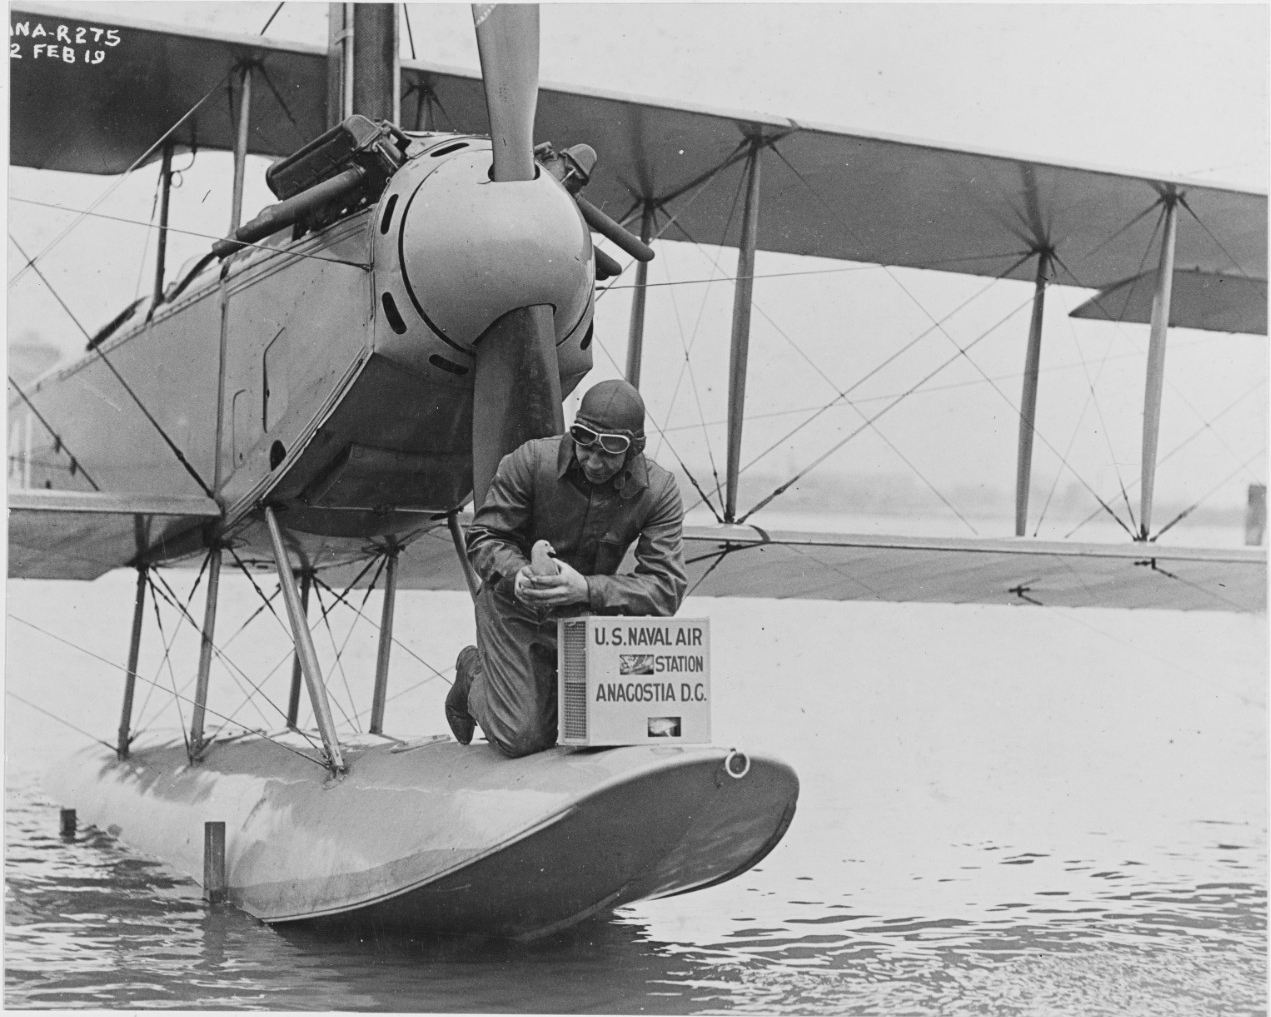 Releasing the Carrier Pigeons from seaplane, U.S. Naval Air Station, Anacostia, Washington, D.C. February 12, 1919.